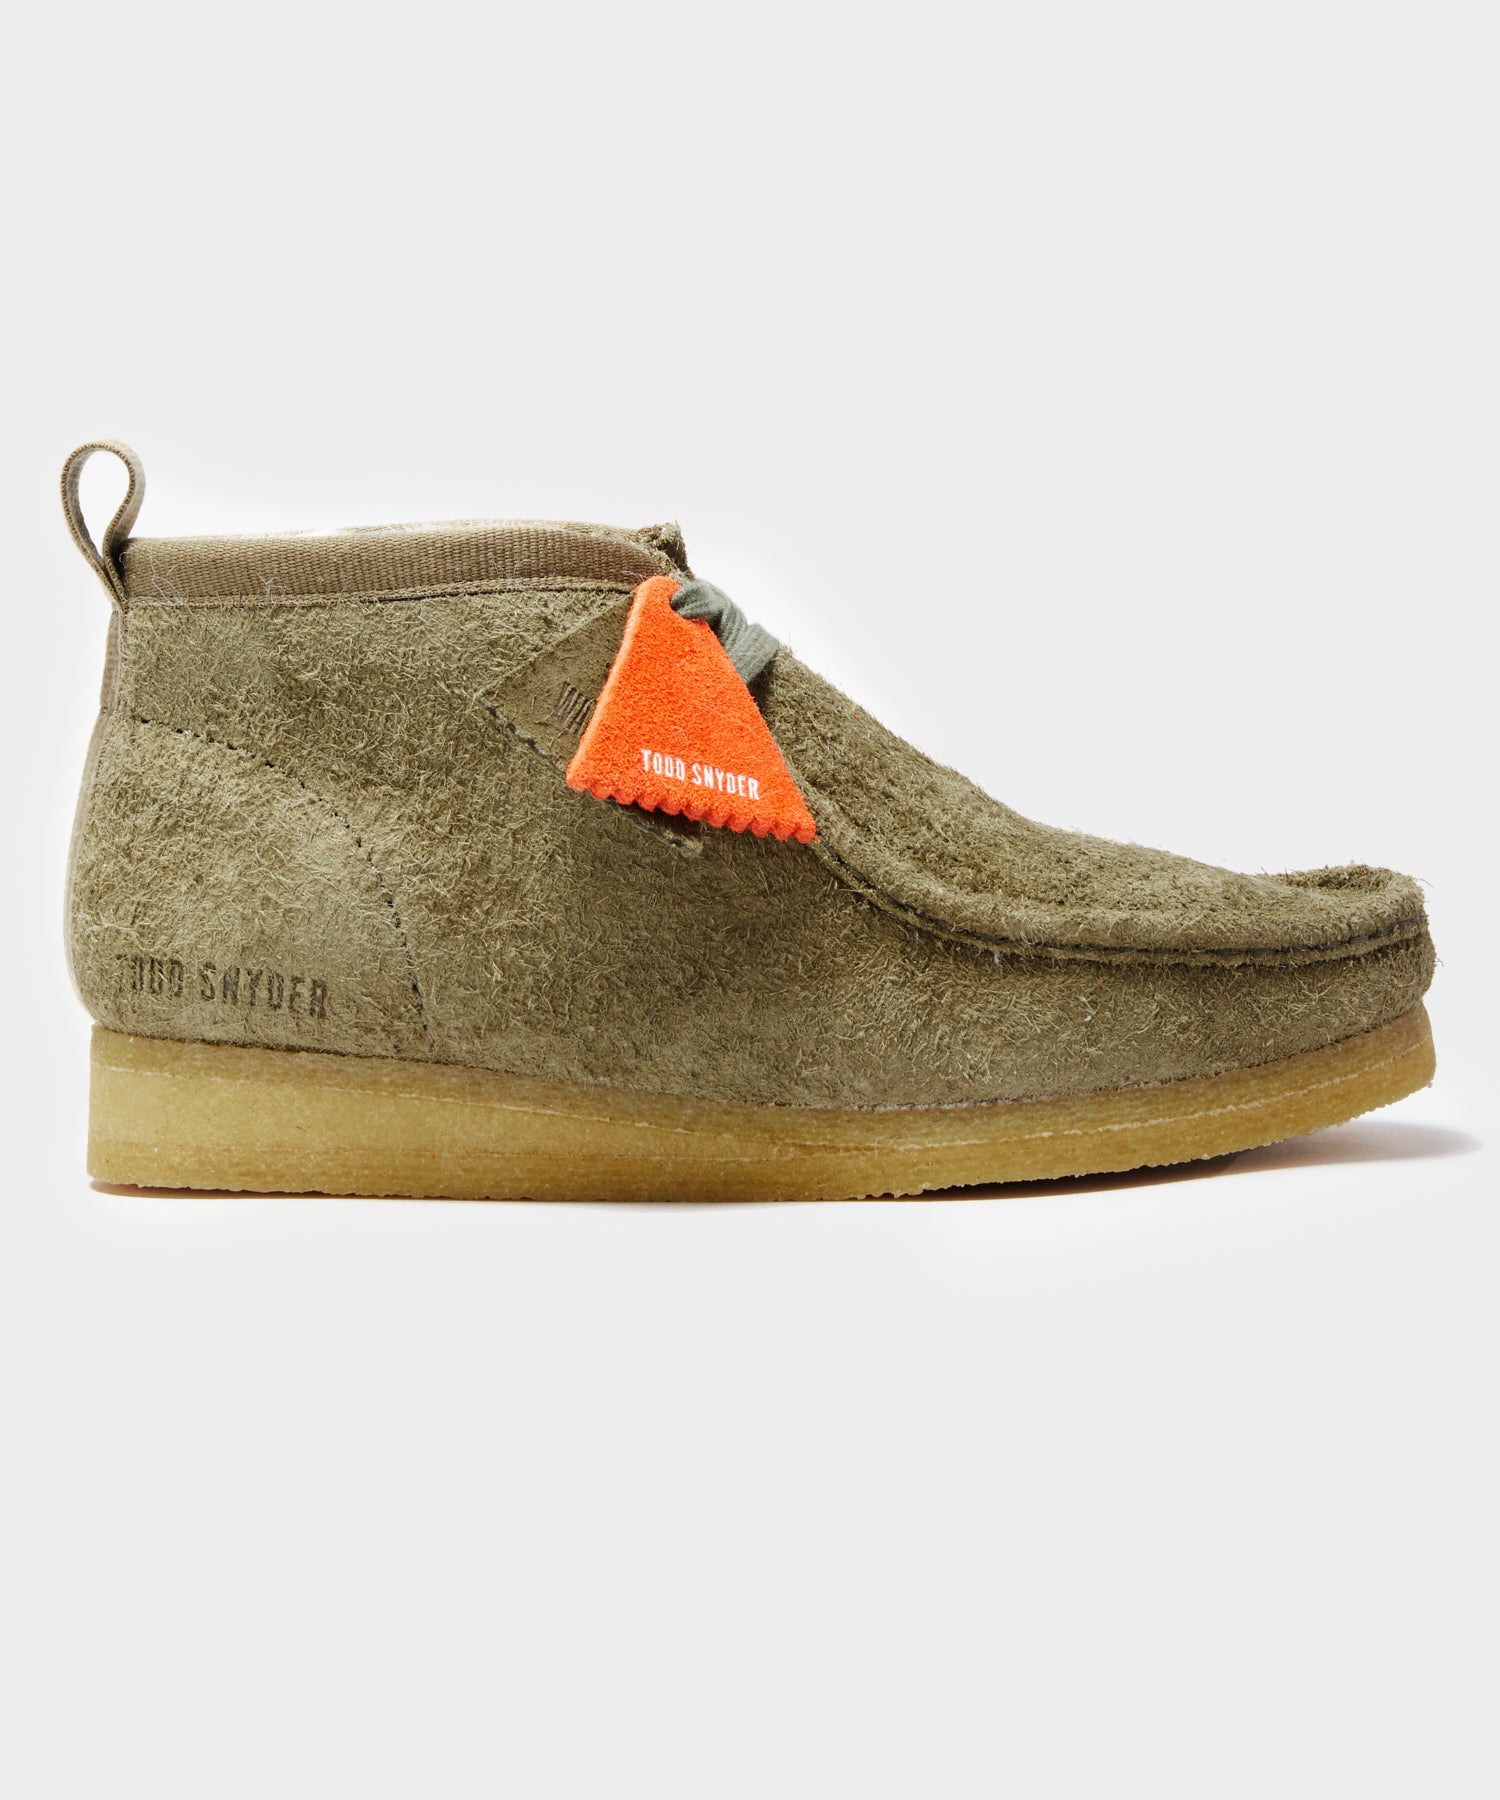 Todd Snyder X Clarks Shearling Wallabee in Olive